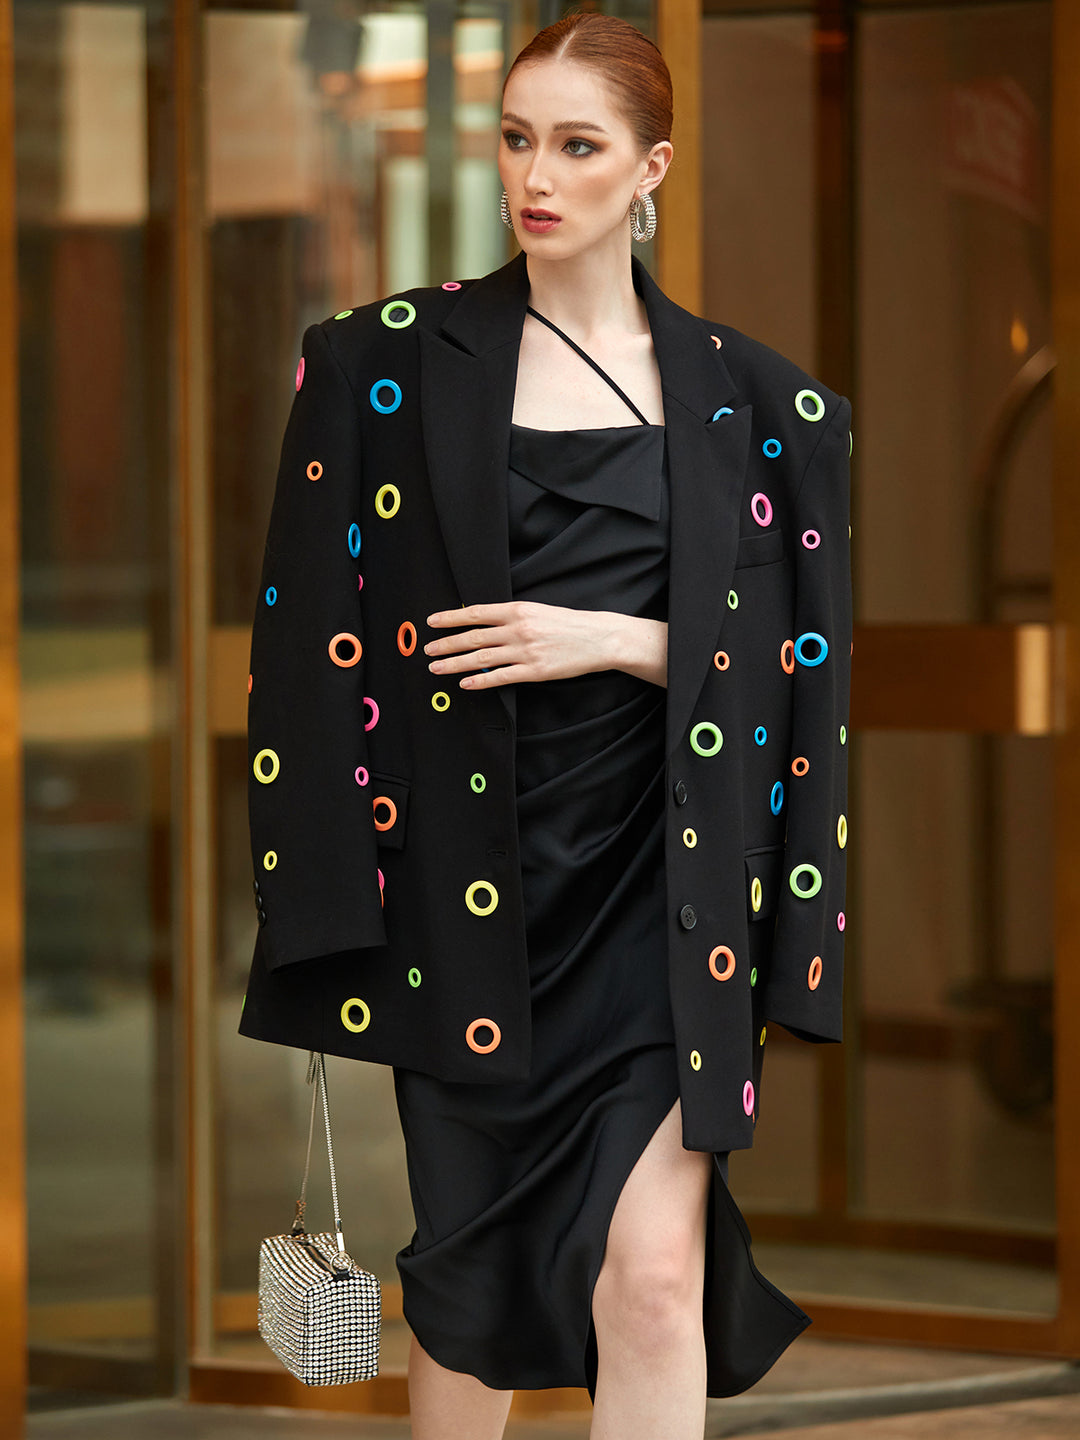 Colored Eyelet Tailored Blazer